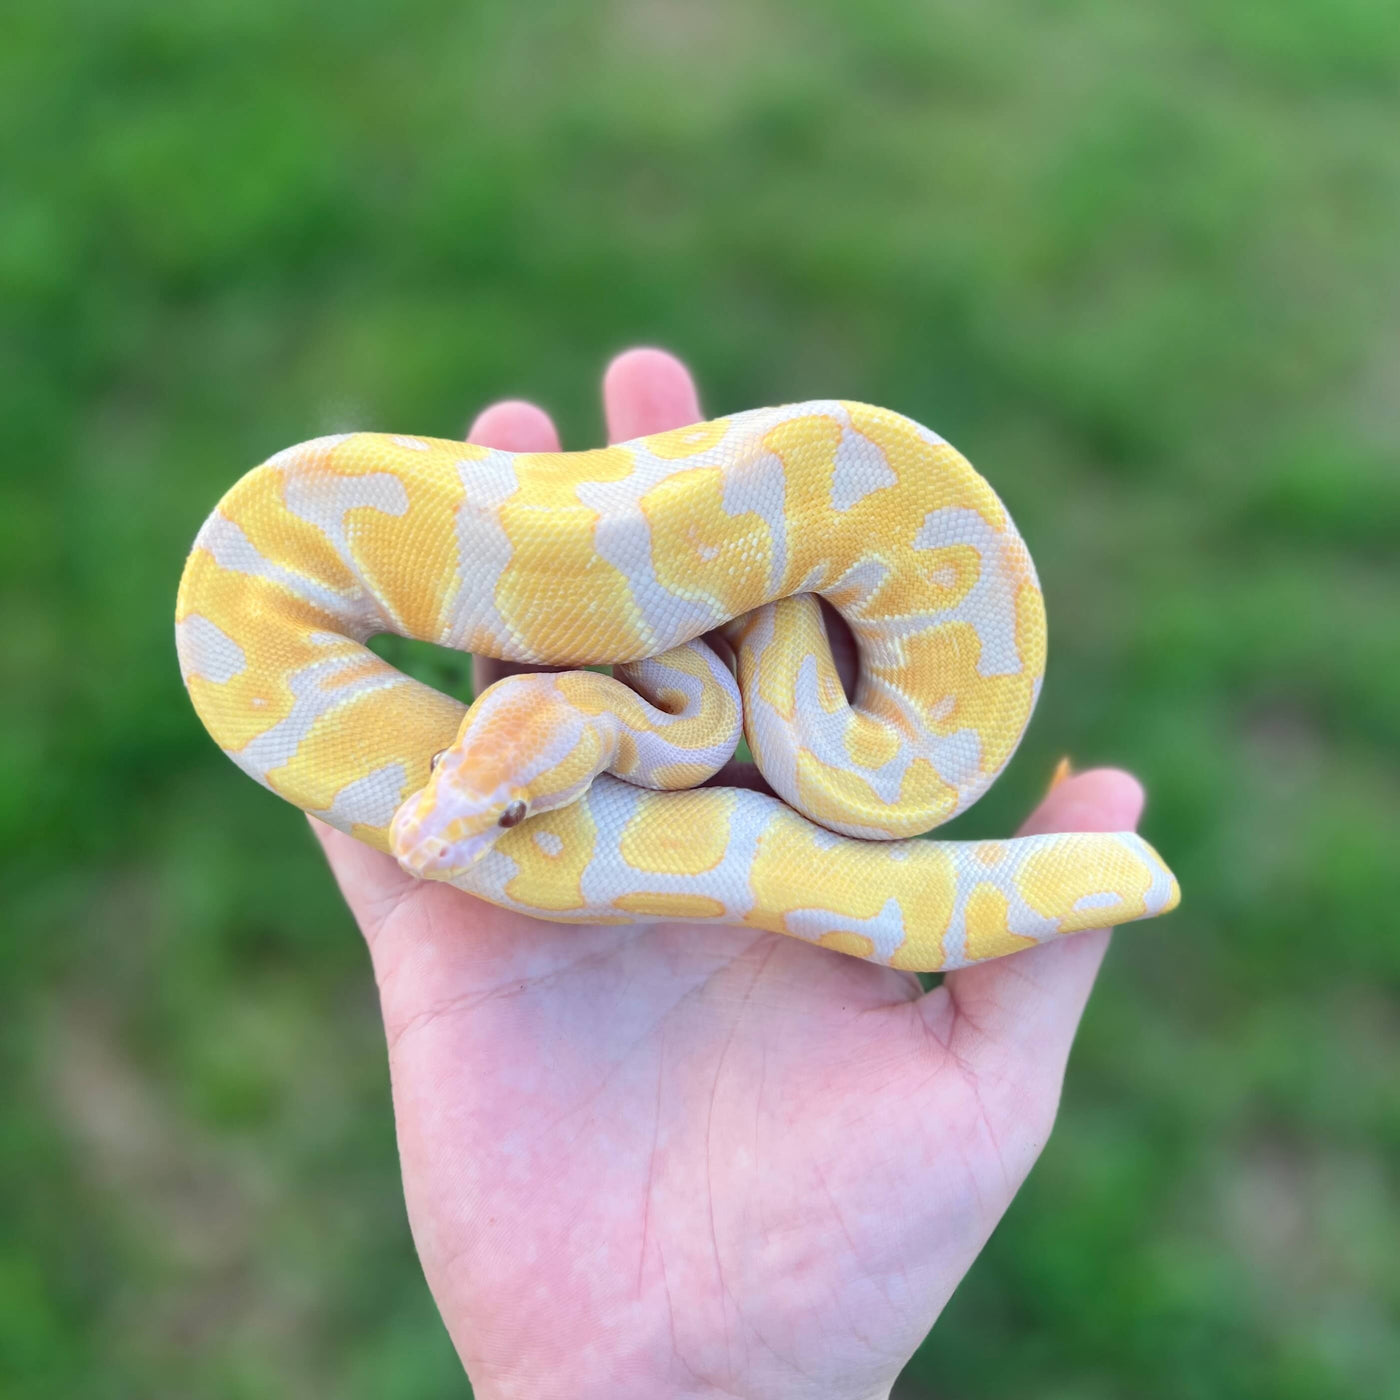 leopard enchi candy ball python for sale online, buy super fire ball pythons at cheap prices